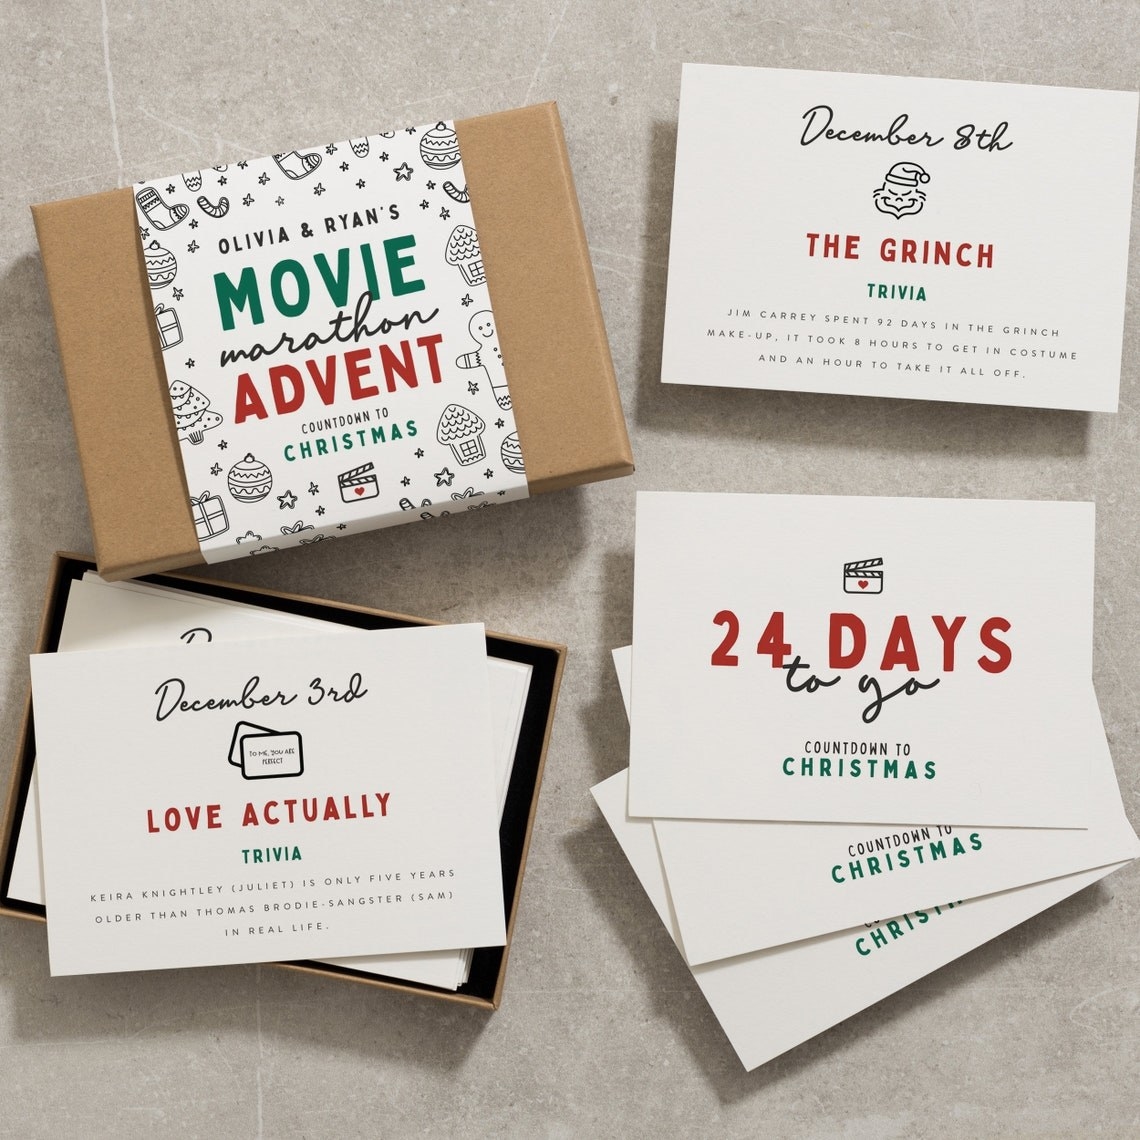 A pack of Christmas movie Advent cards, with a suggested movie and trivia on each card